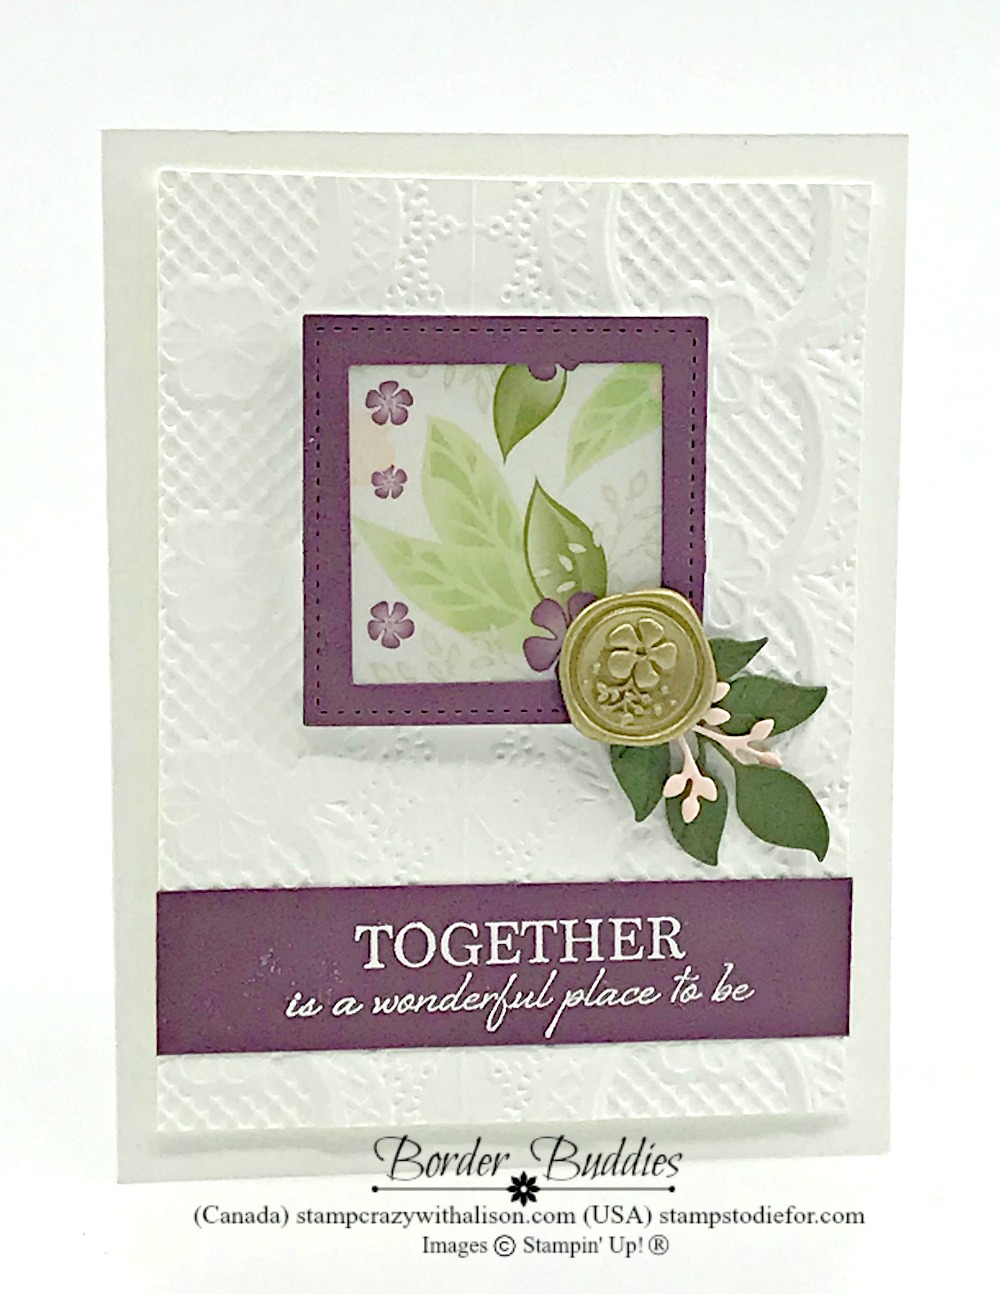 Saturday Suite Series – Floral Romance from Stampin’ Up!®